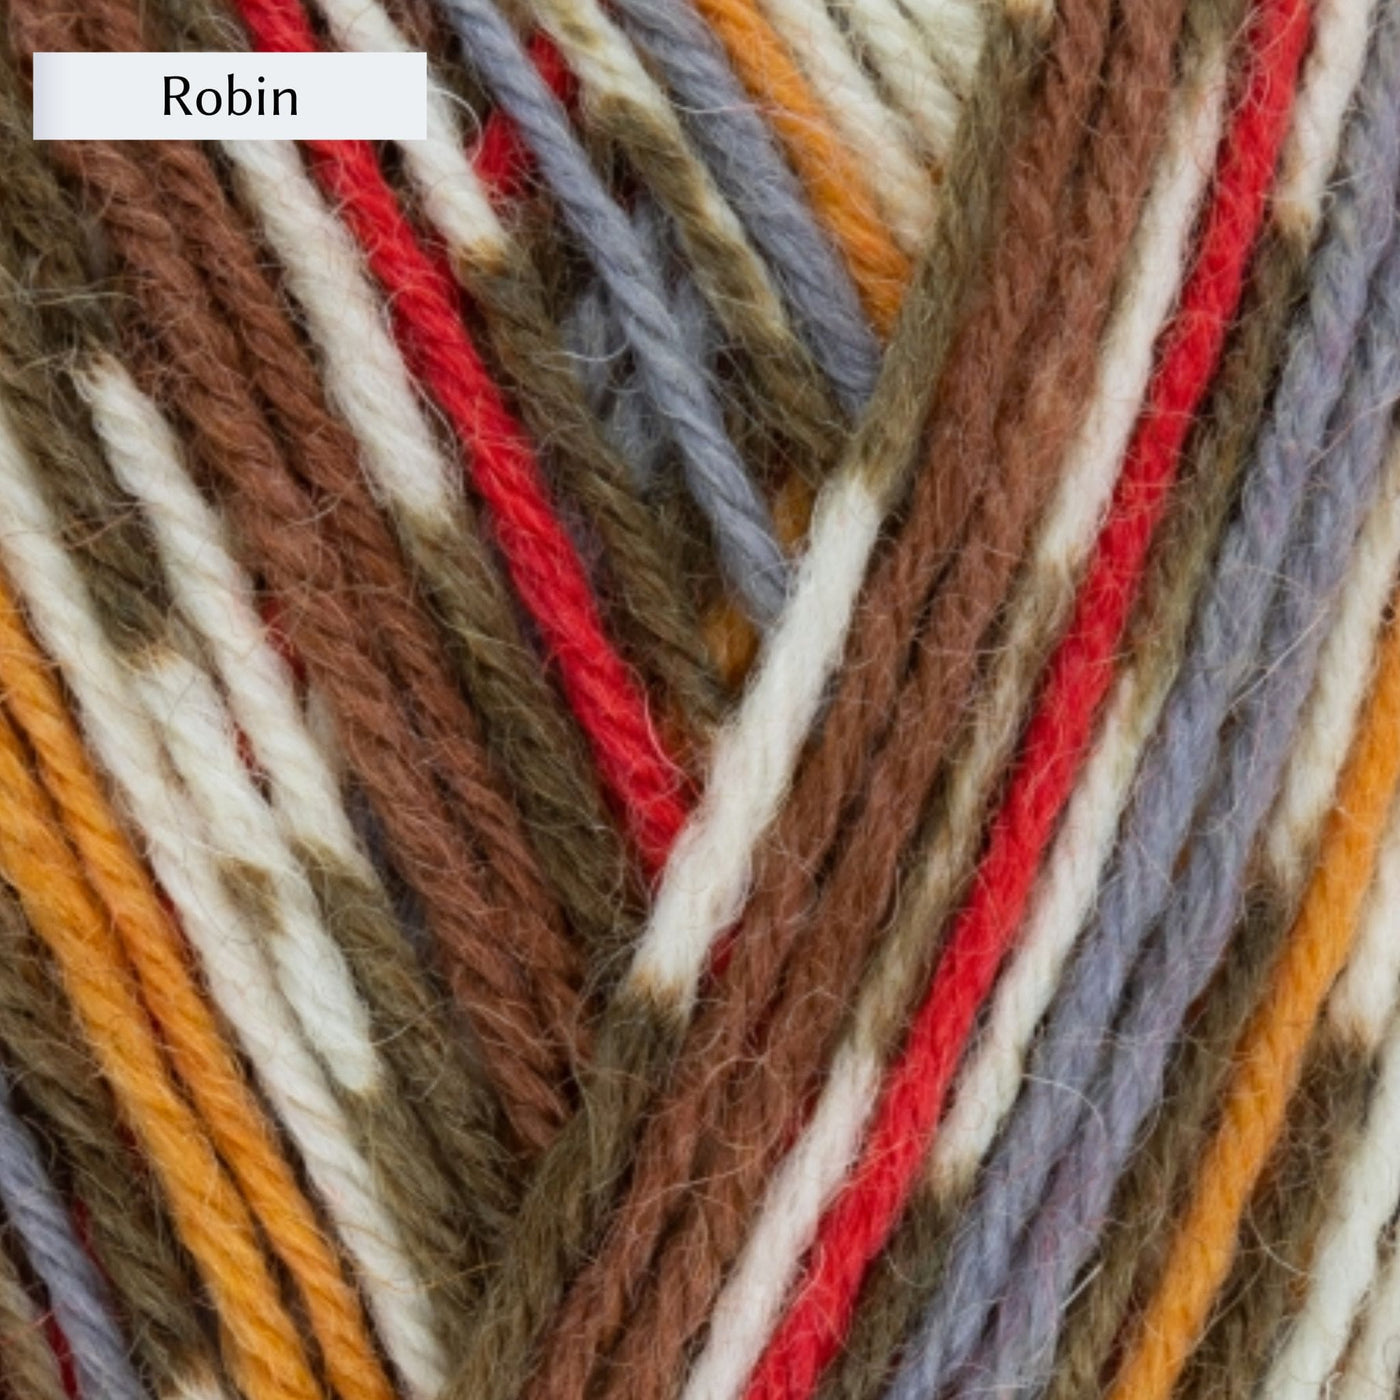 A close-up picture of West Yorkshire Spinners Signature 4ply yarn, fingering weight, in color Robin